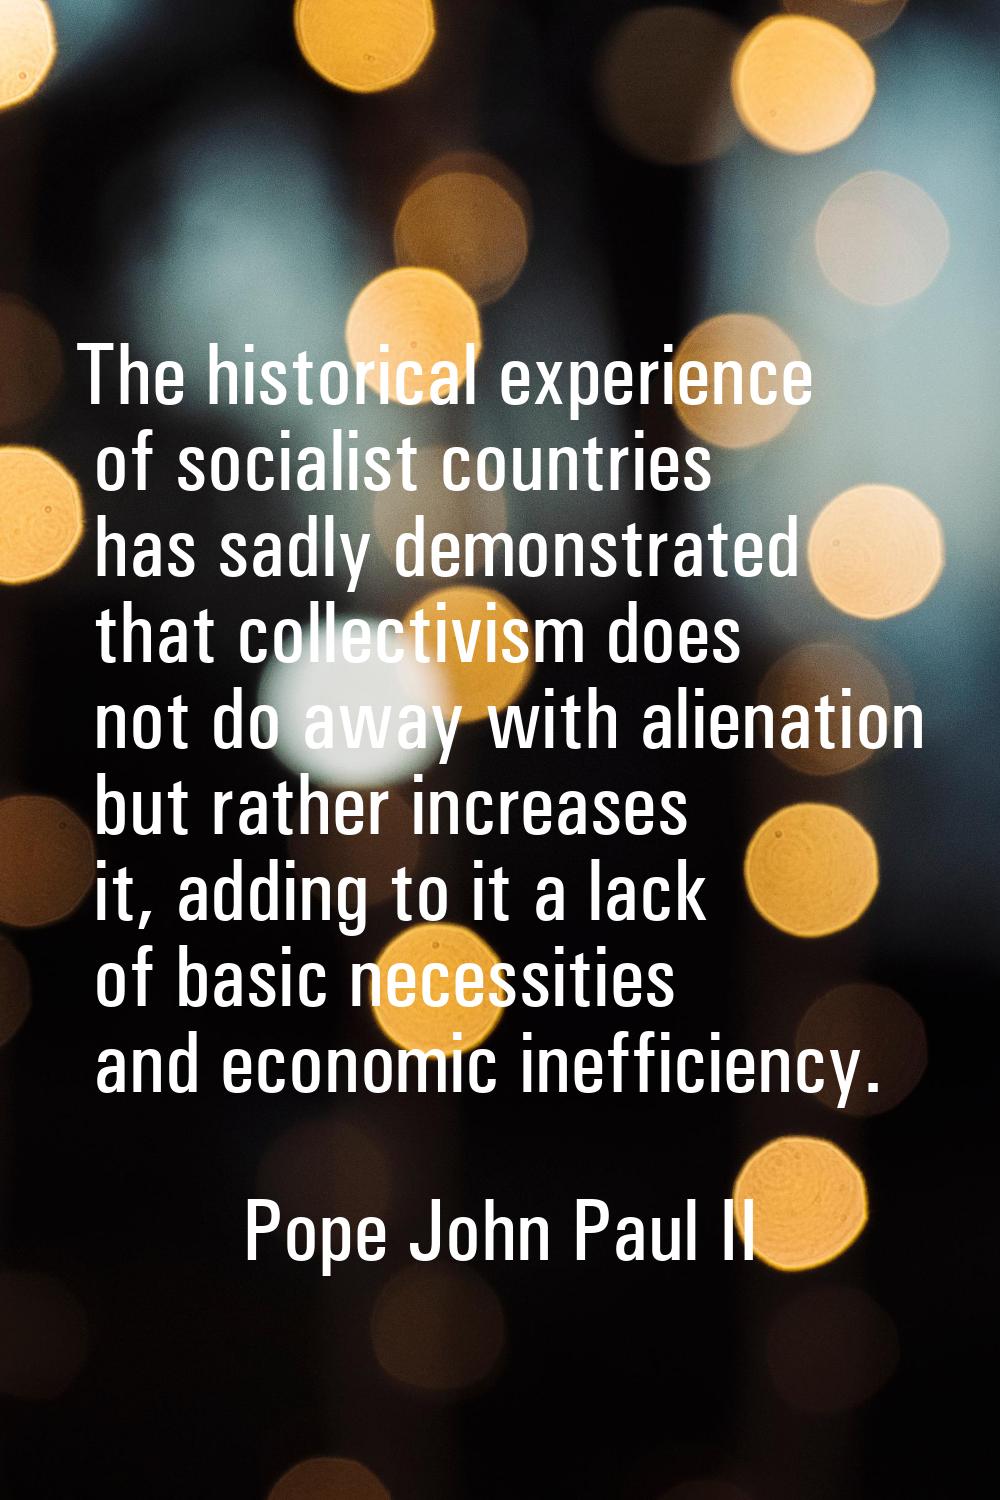 The historical experience of socialist countries has sadly demonstrated that collectivism does not 